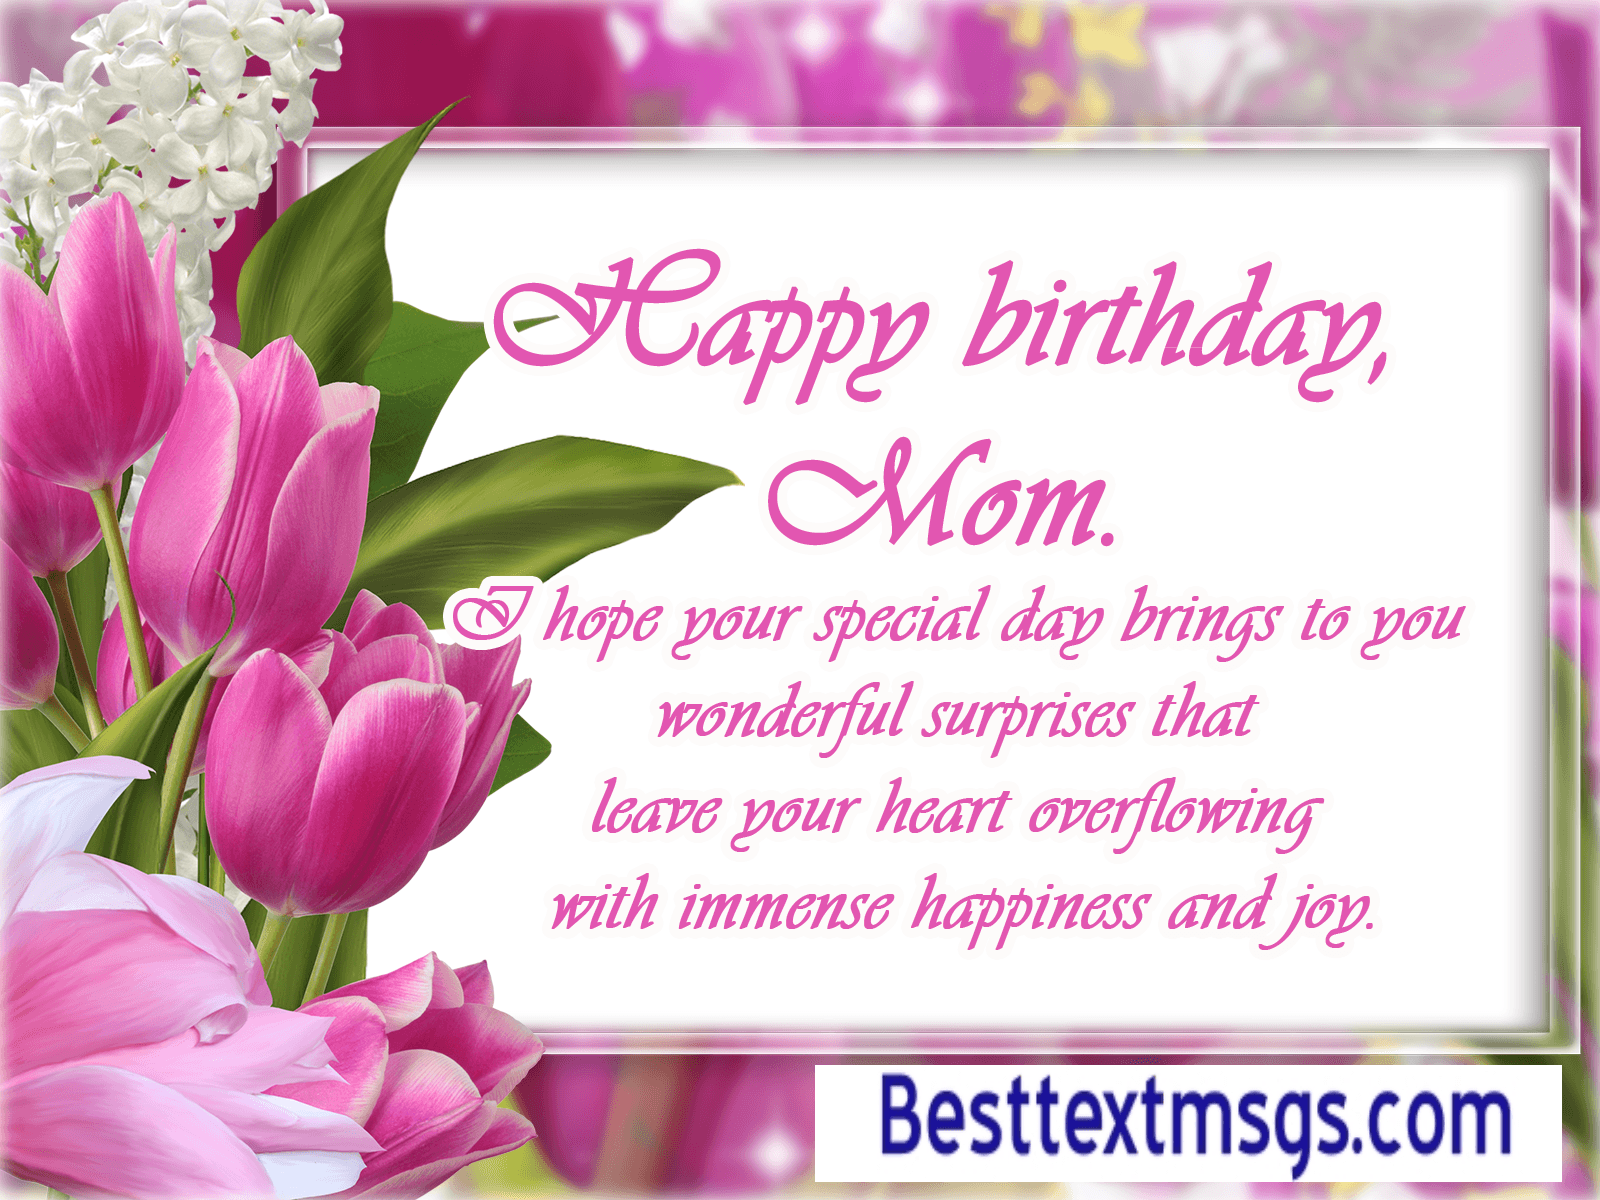 Happy Birthday Mom Image Quotes wishes message